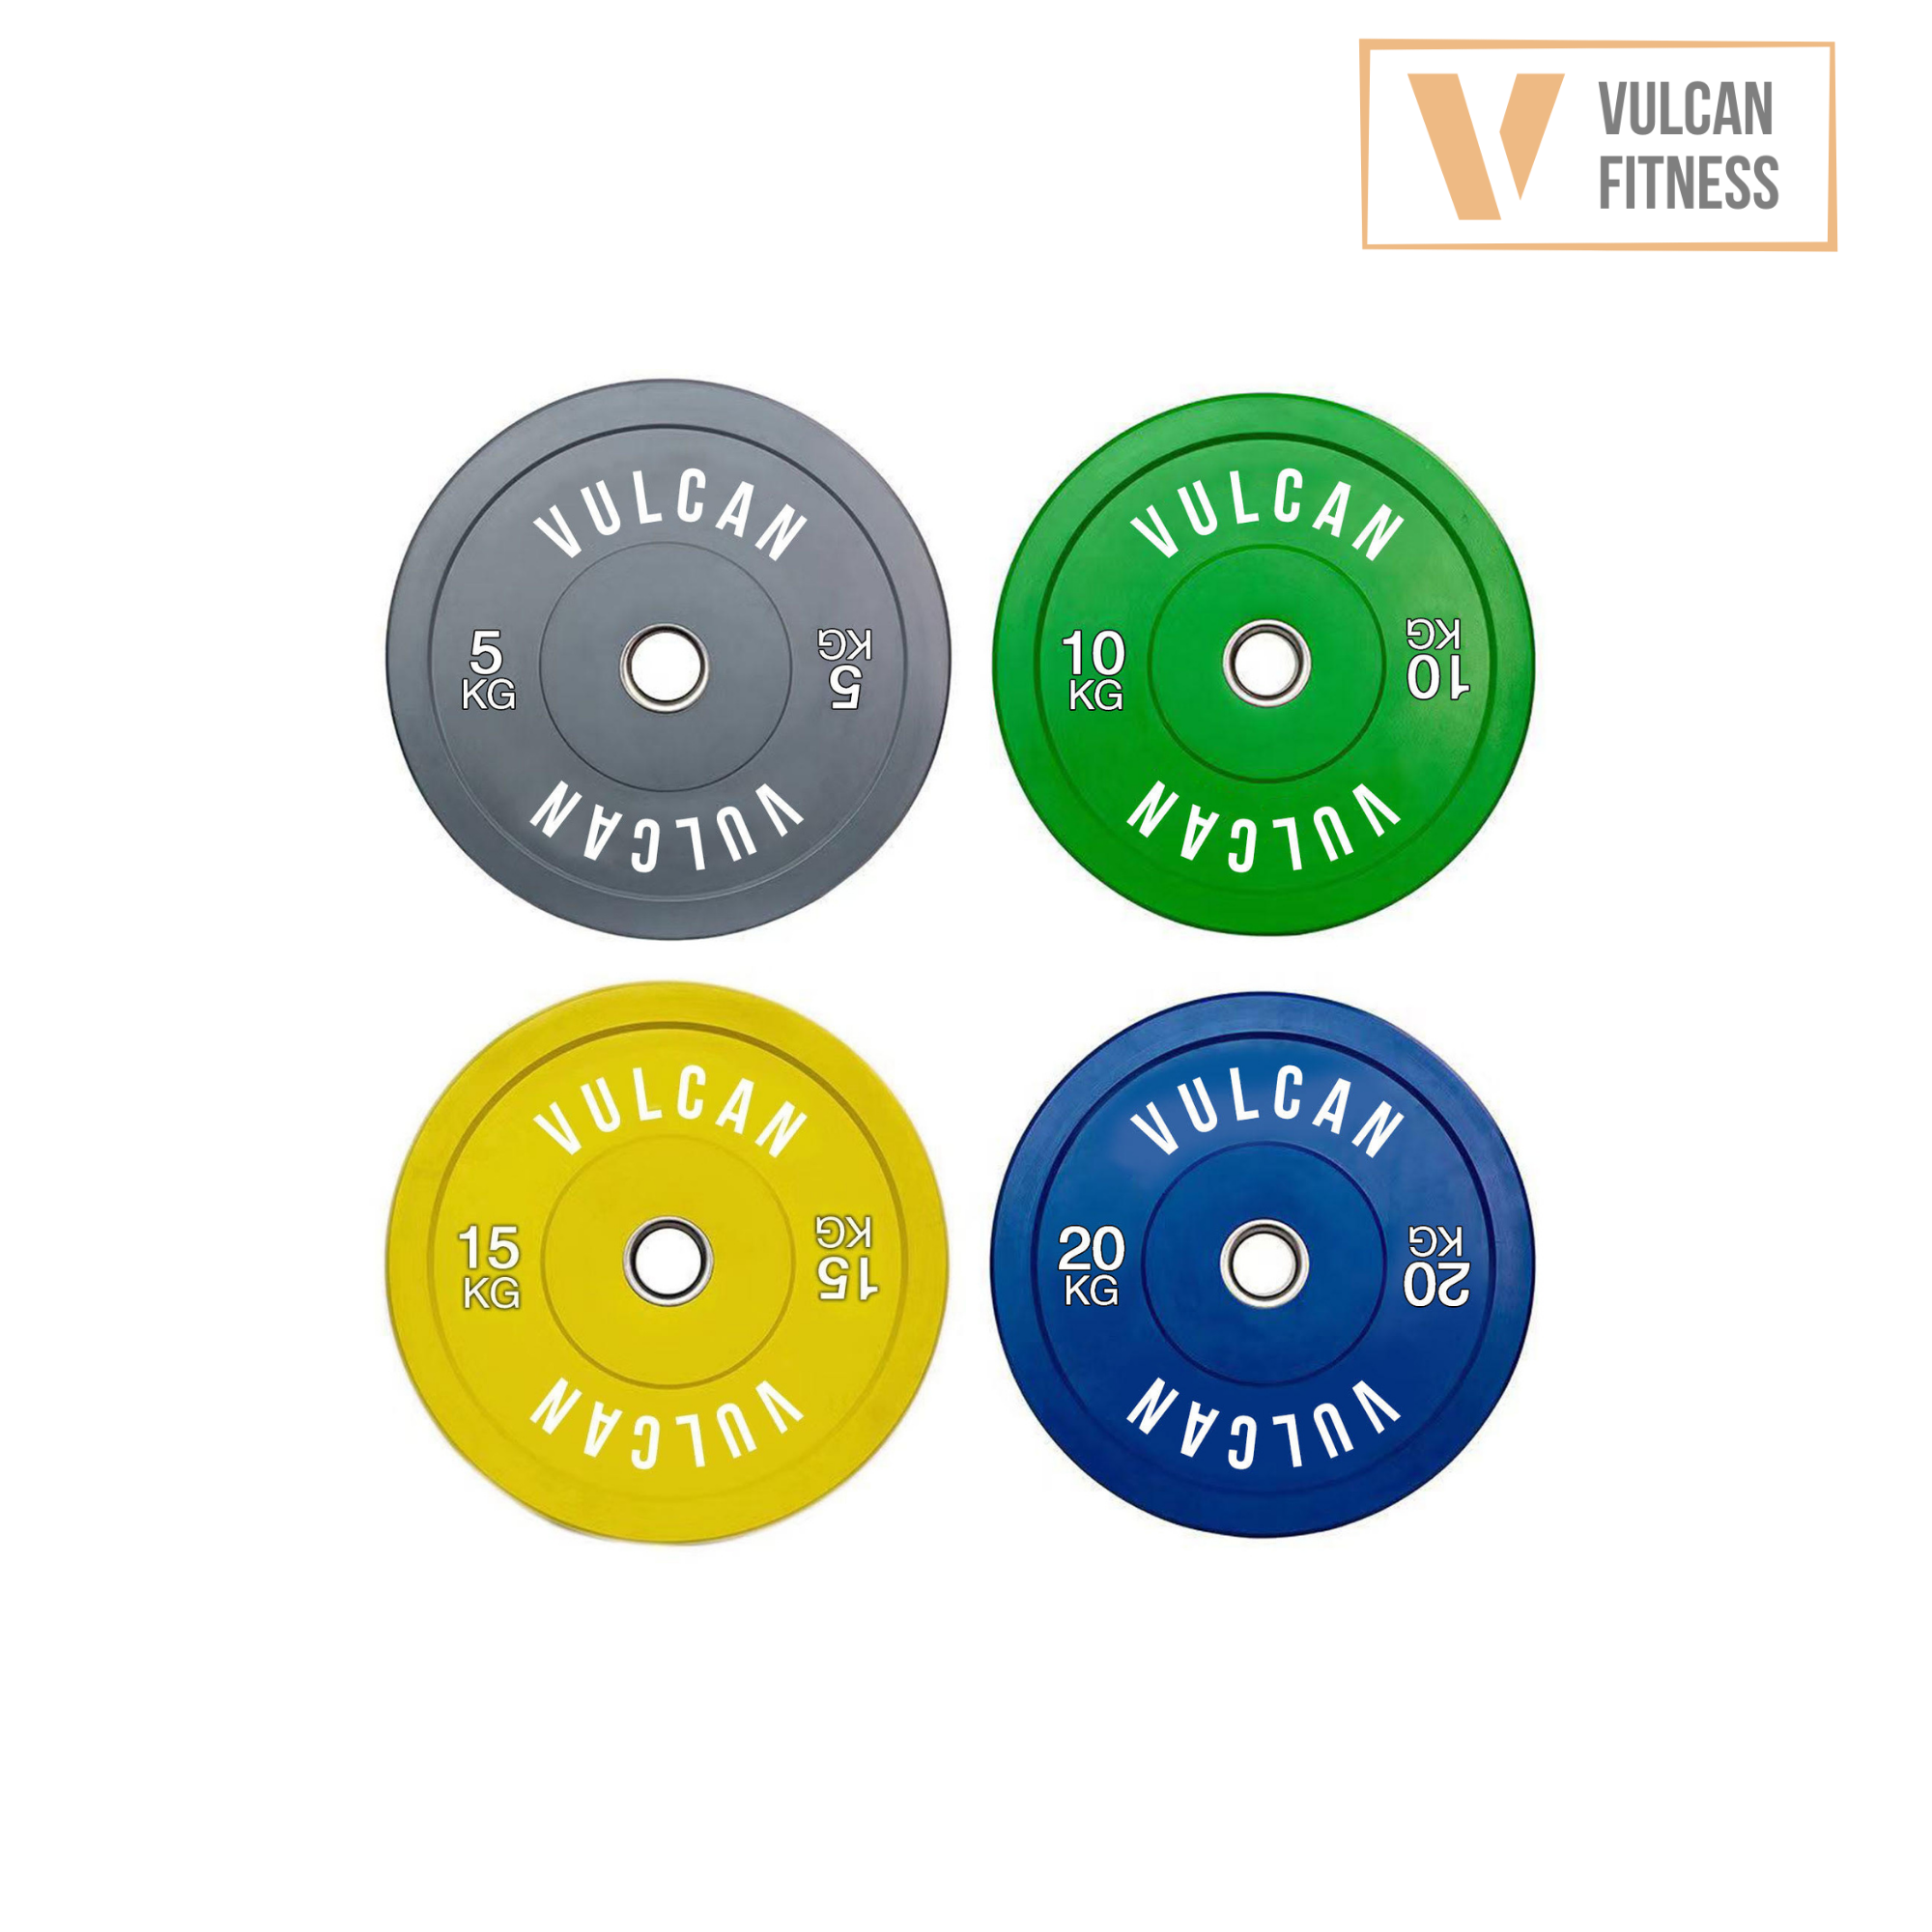 VULCAN Commercial Power Cage, Olympic Barbell, 100kg Colour Bumper Weight Plates & Commercial FID Bench | IN STOCK